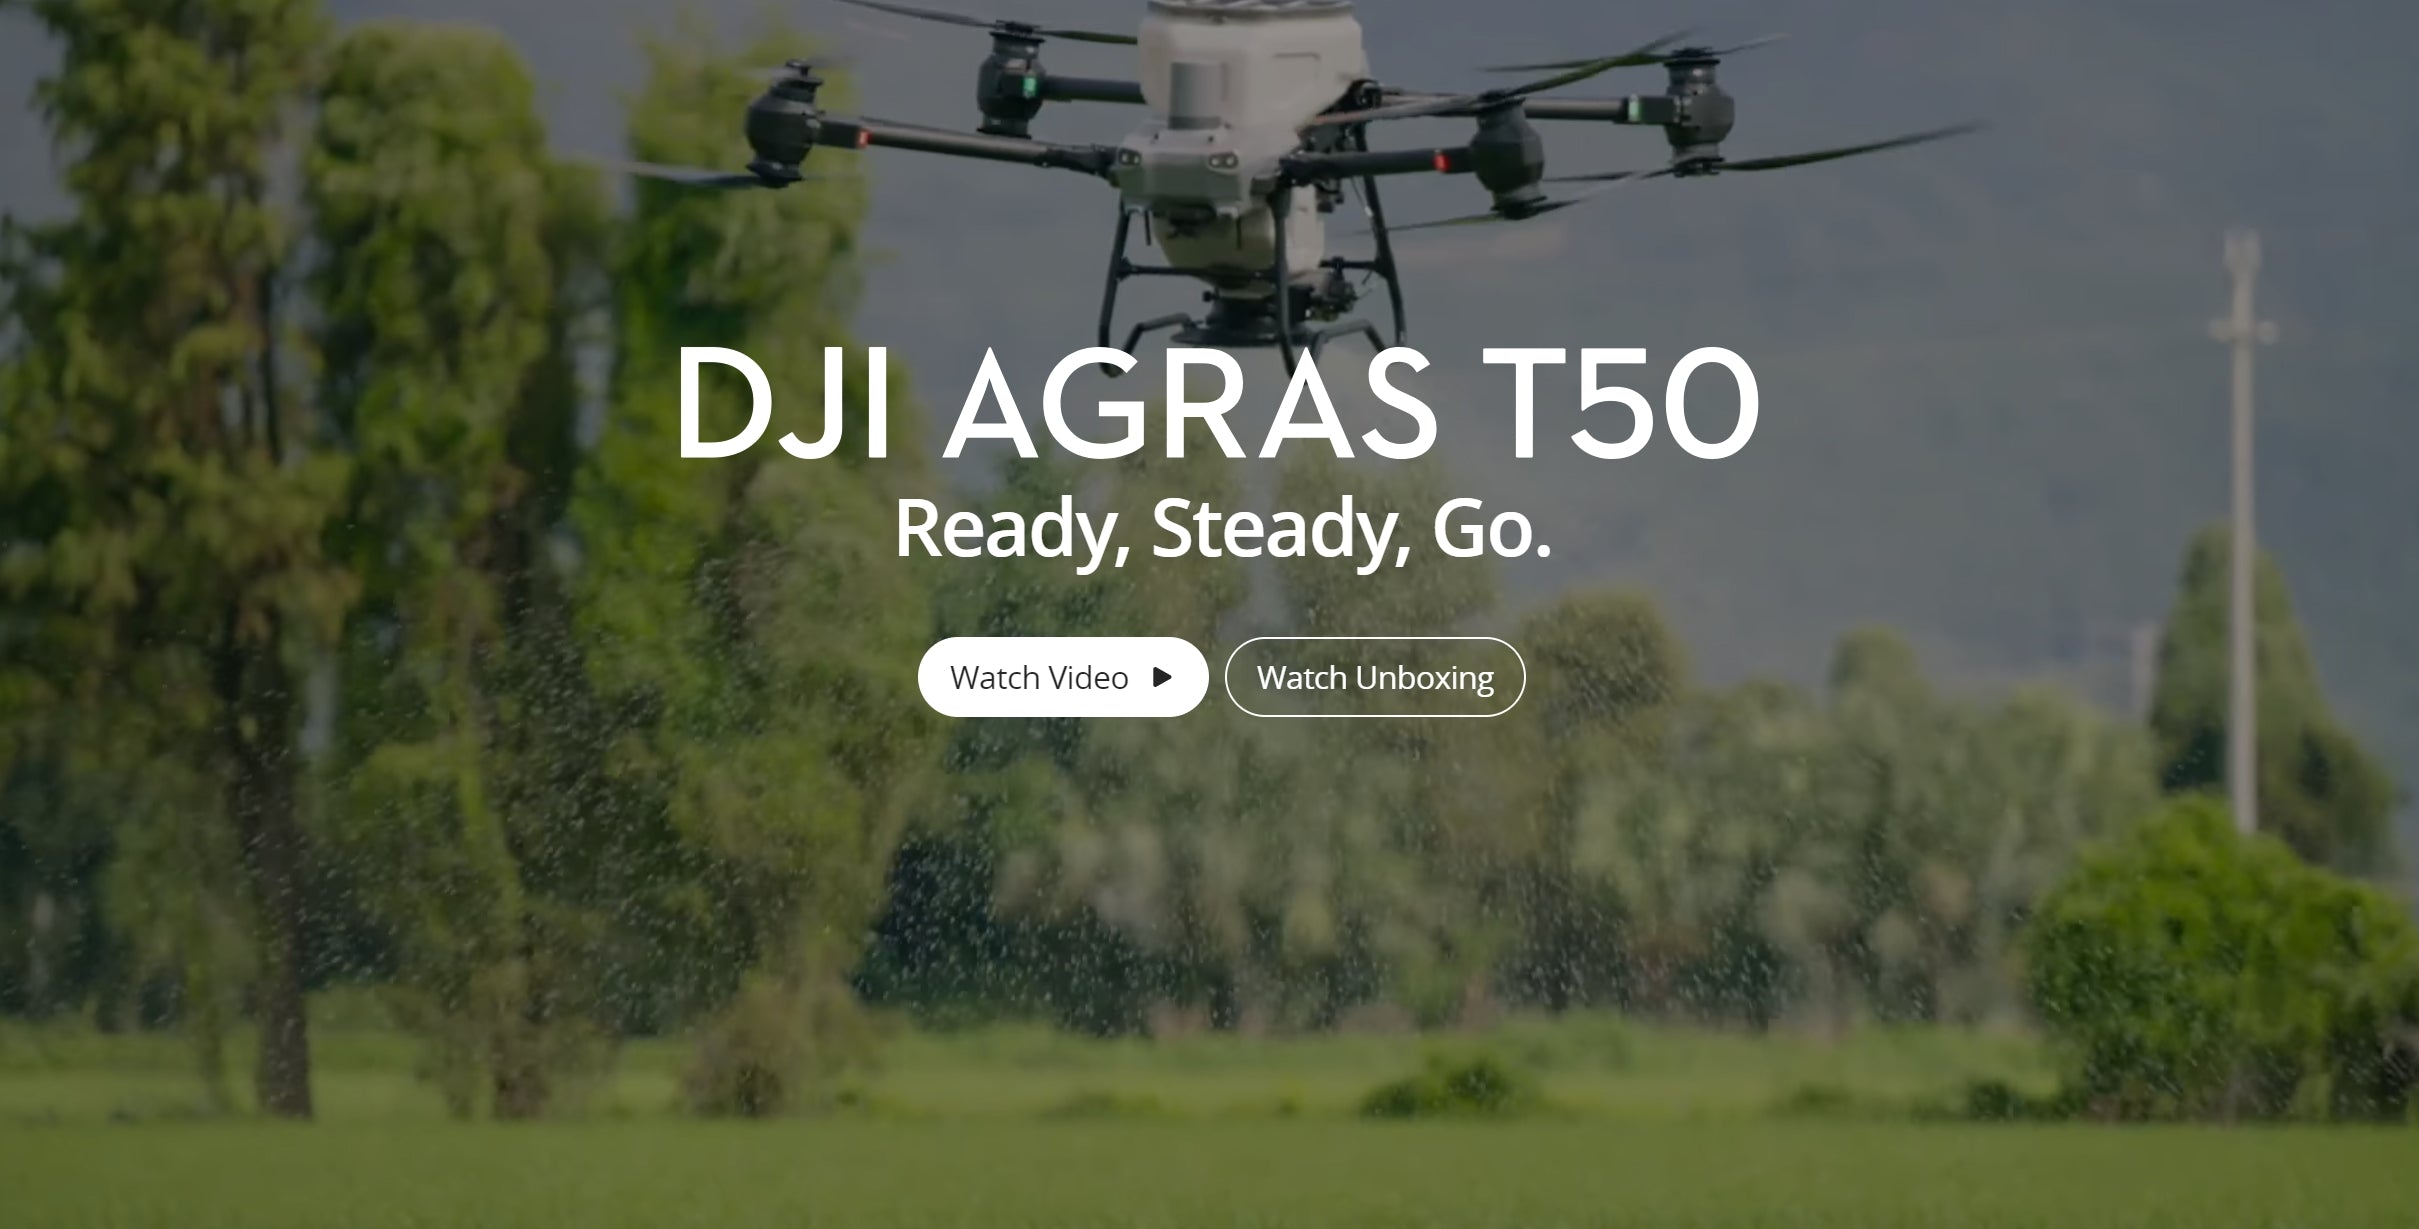 DJI Agras T50 , Agras T50 drone for efficient farming, sprays 40kg and spreads 50kg, perfect for large-scale agricultural applications.